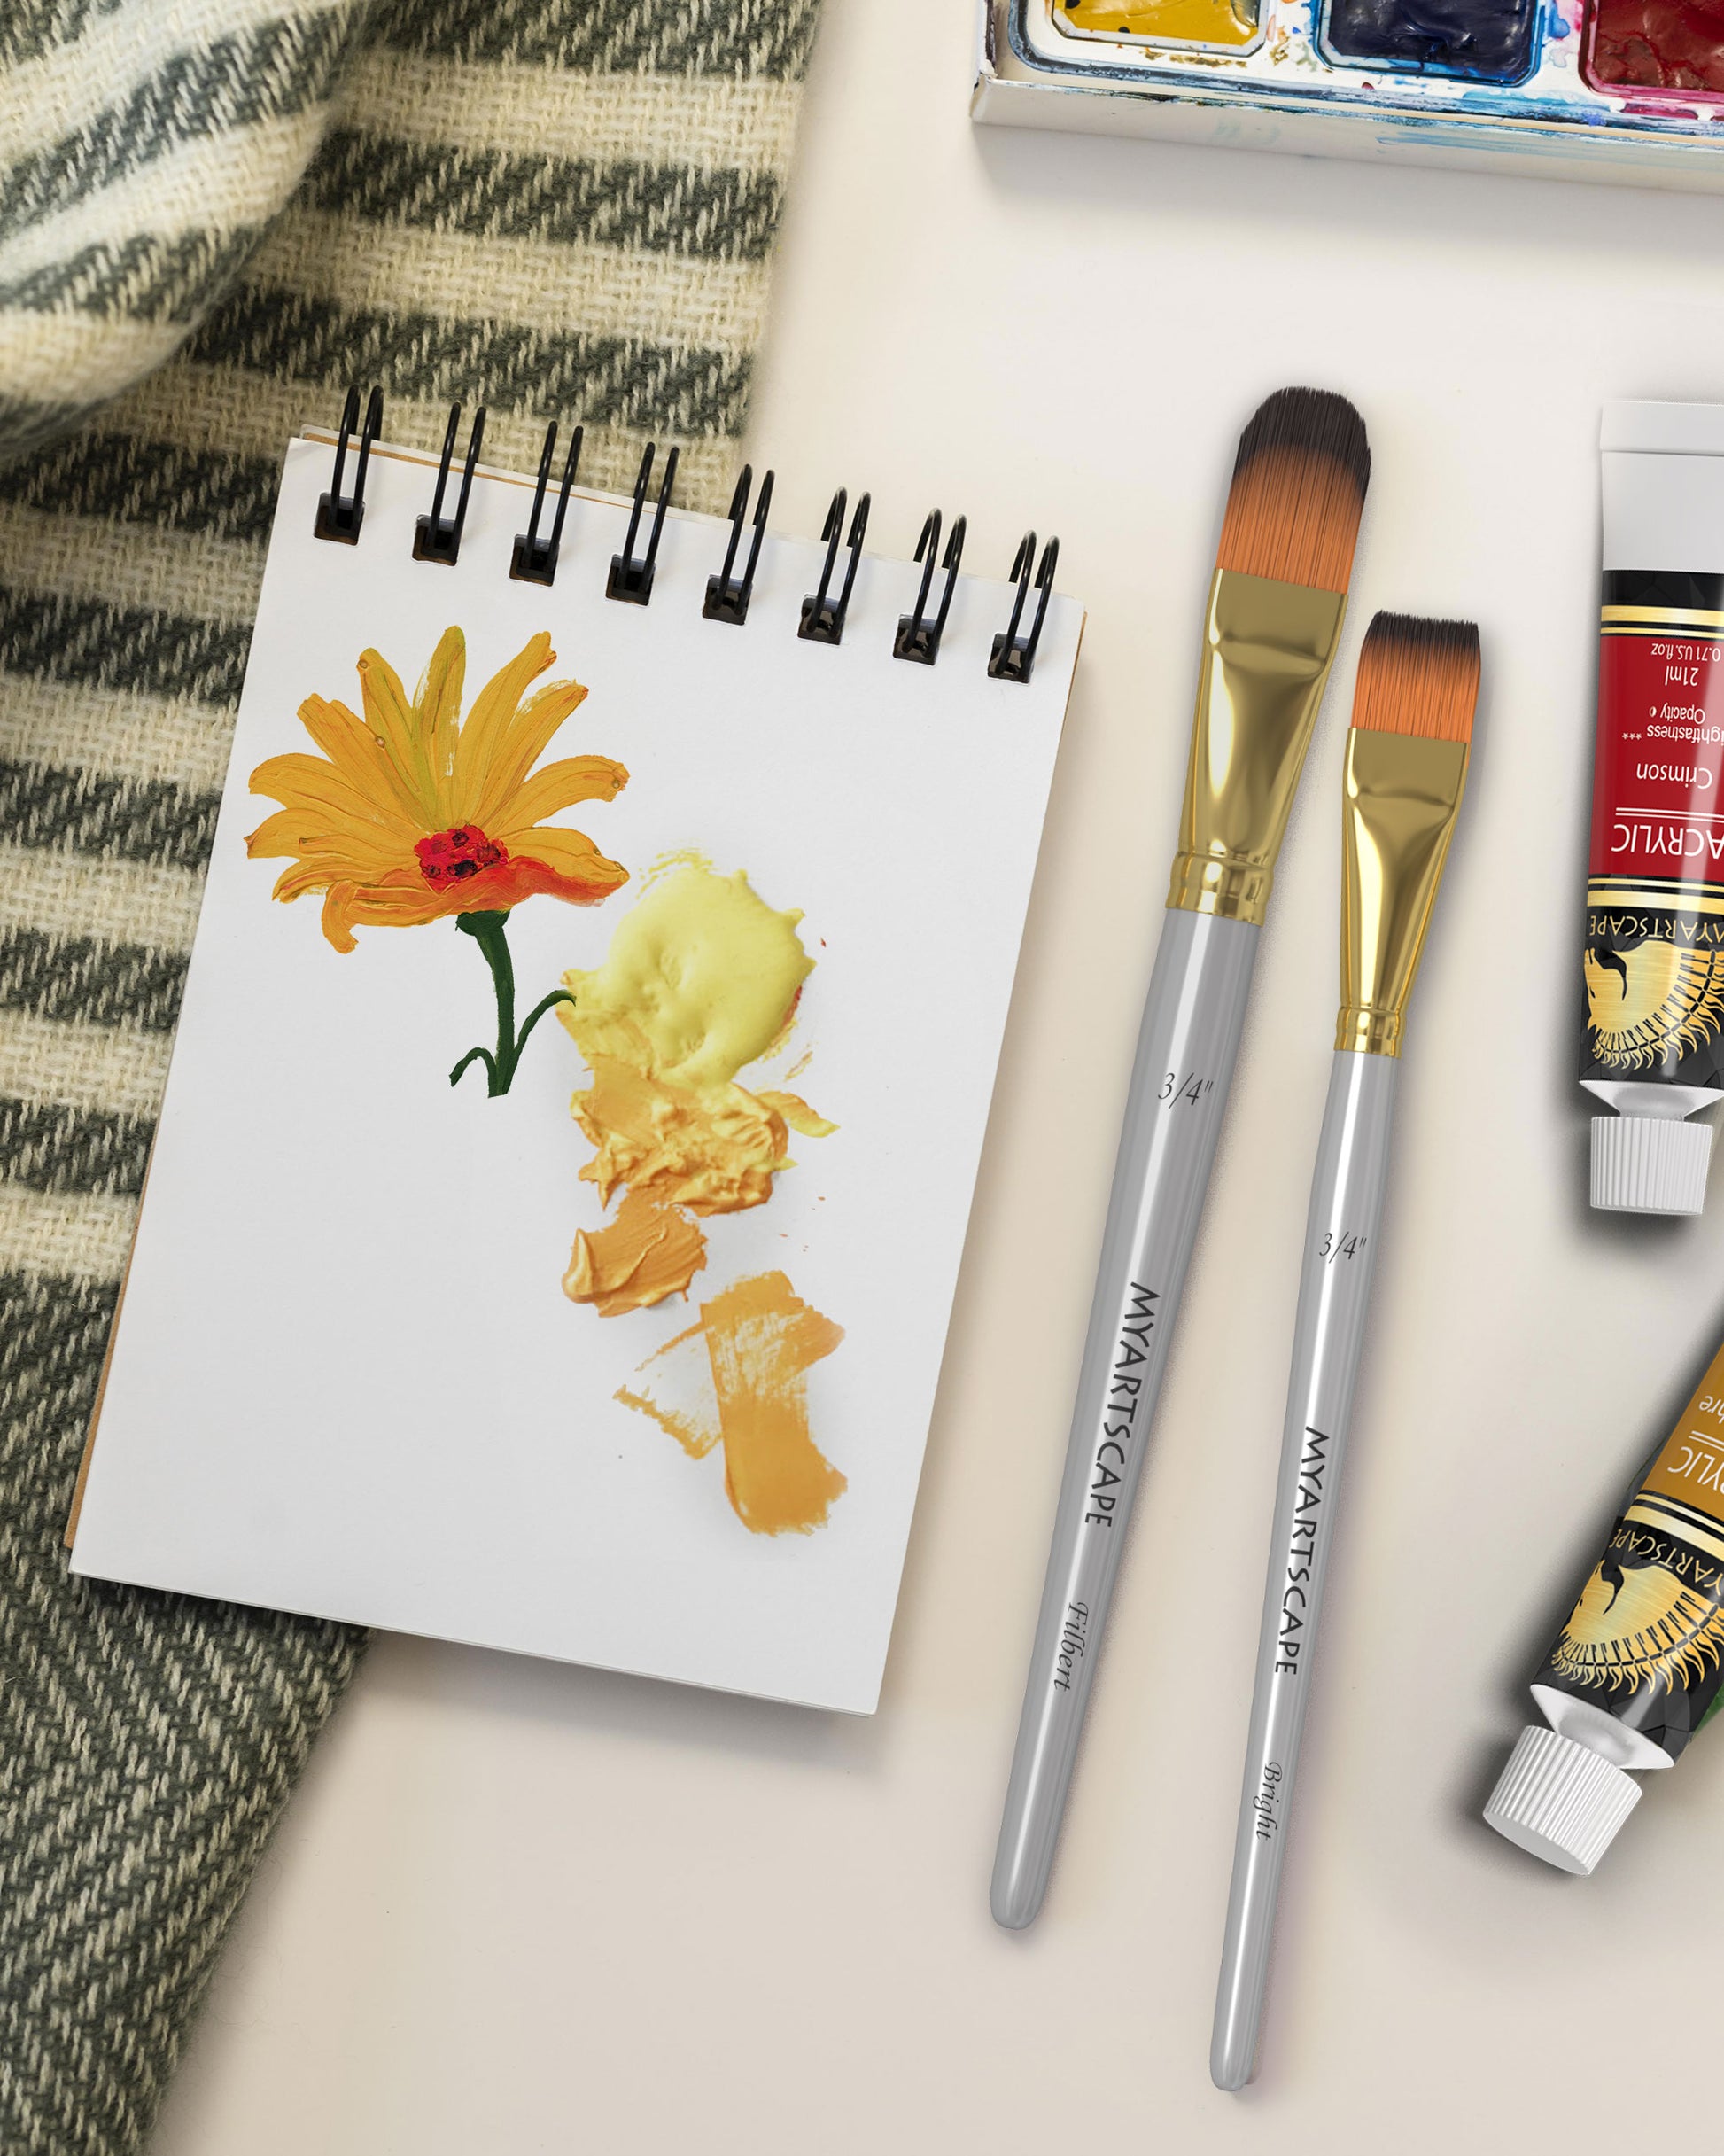 Paintbrushes for Acrylic Painters